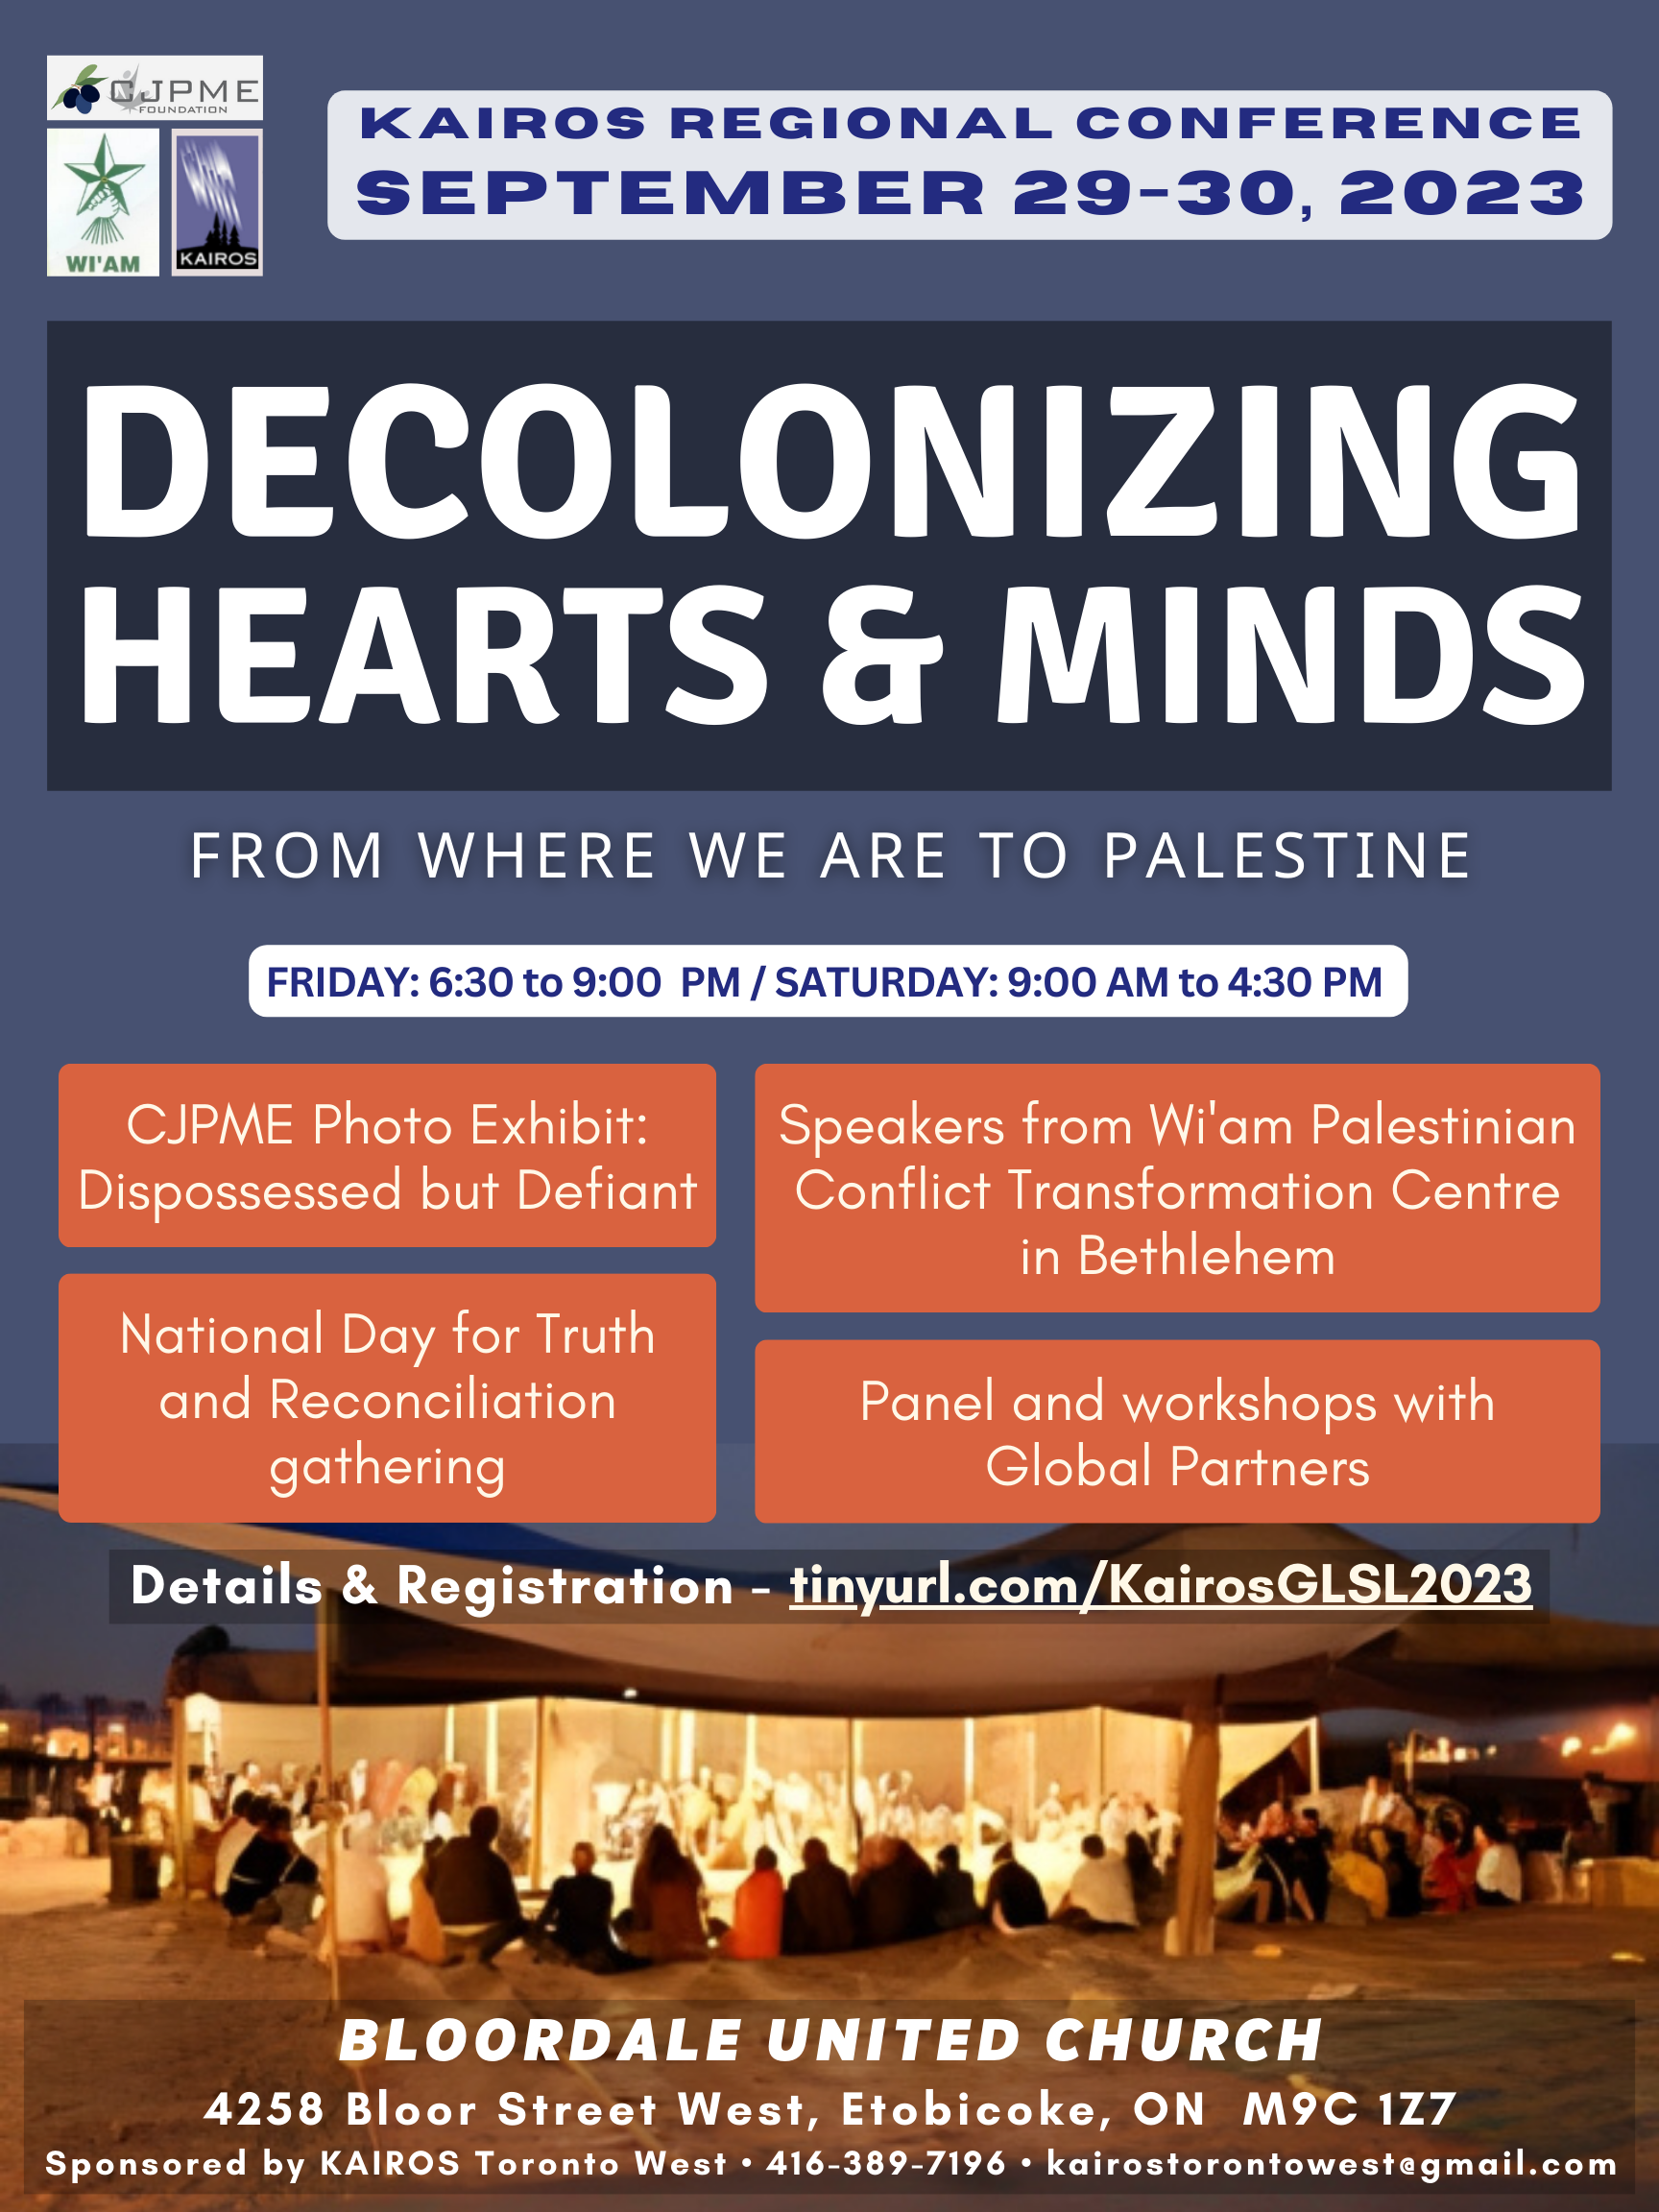 Decolonizing Hearts & Minds event poster